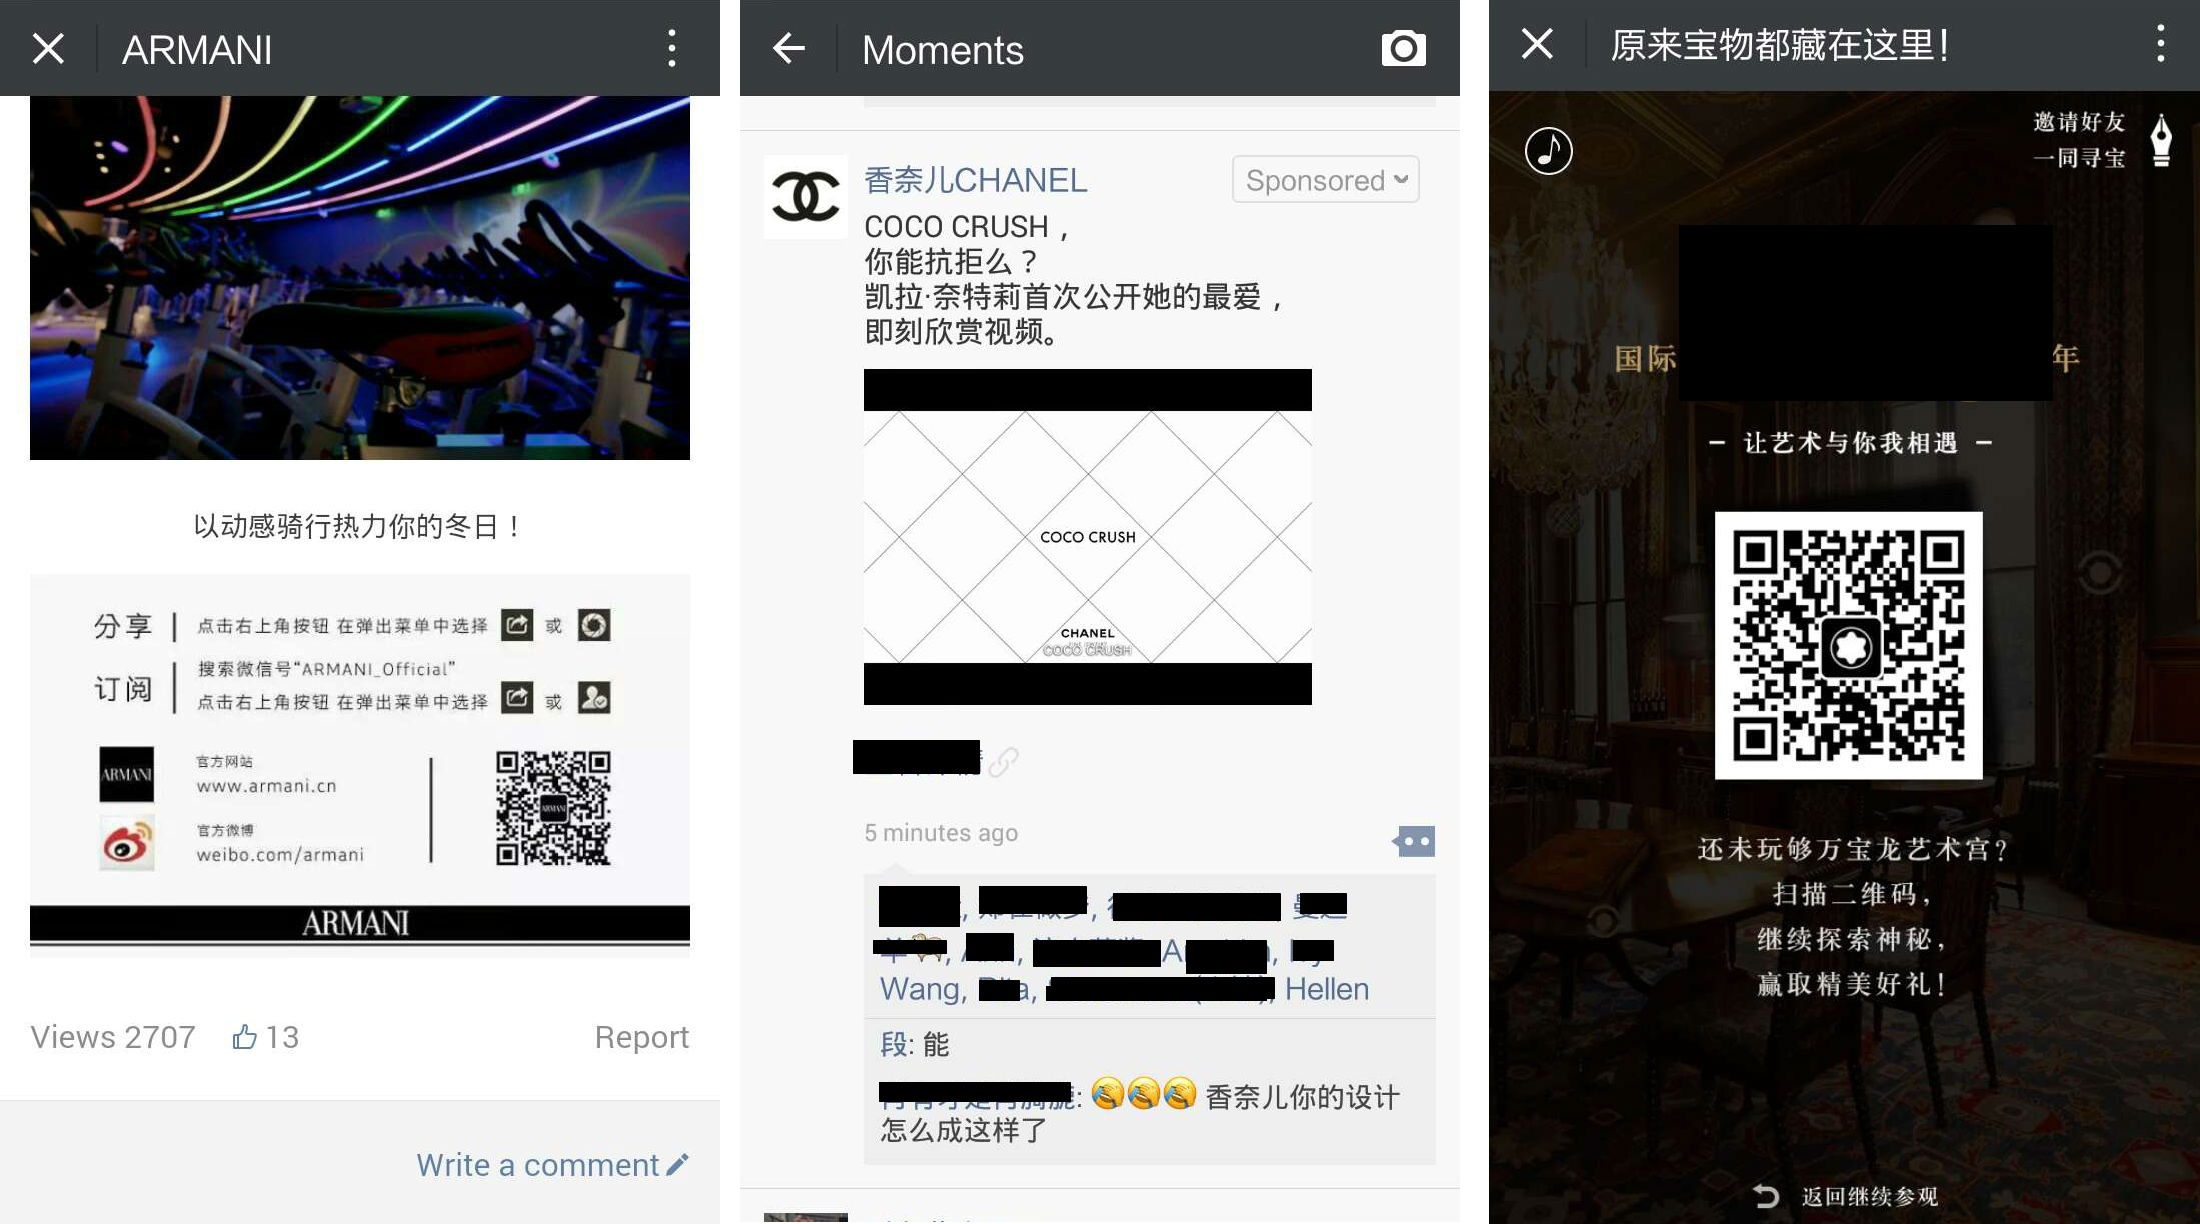 Armani illustrates how users can share their blog post on WeChat Moments (far left), Montblanc uses a moving pen tip icon to point to where users can click to share their blog post (far right), examples of non-incentivized prompts to spread the word. In the middle screenshot, Chanel advertises its campaign video in WeChat Moments.